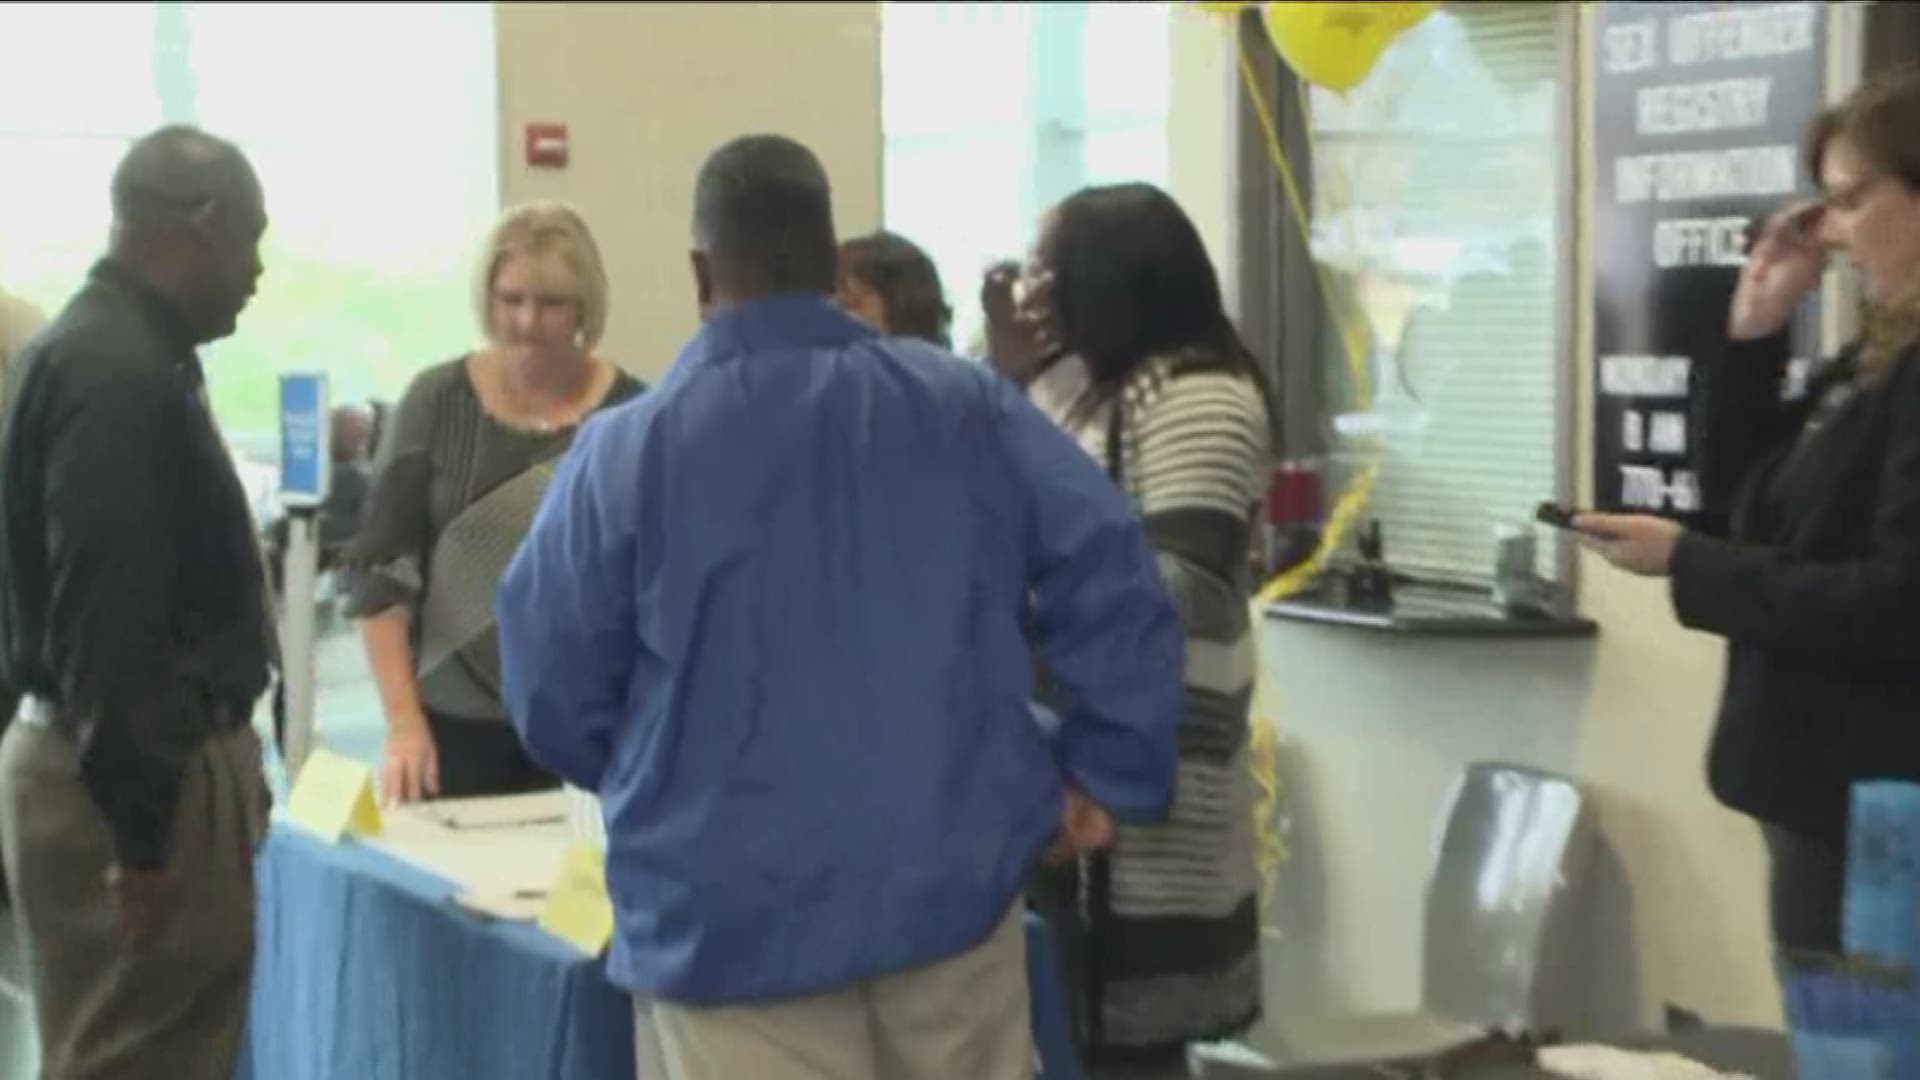 Here's a look at the job fair.